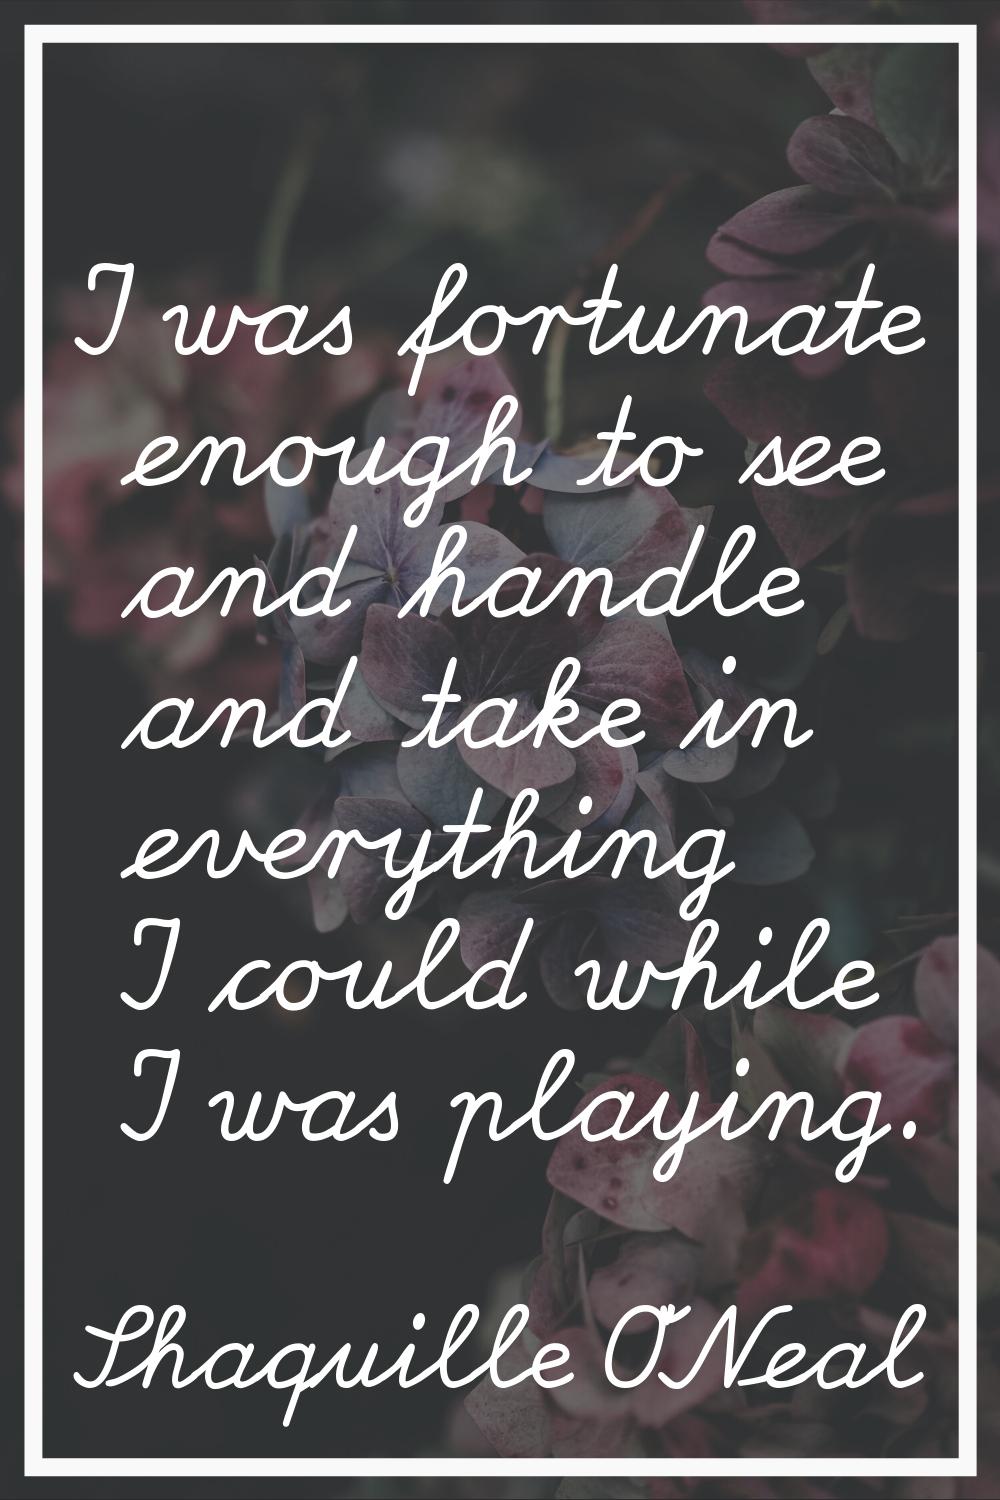 I was fortunate enough to see and handle and take in everything I could while I was playing.